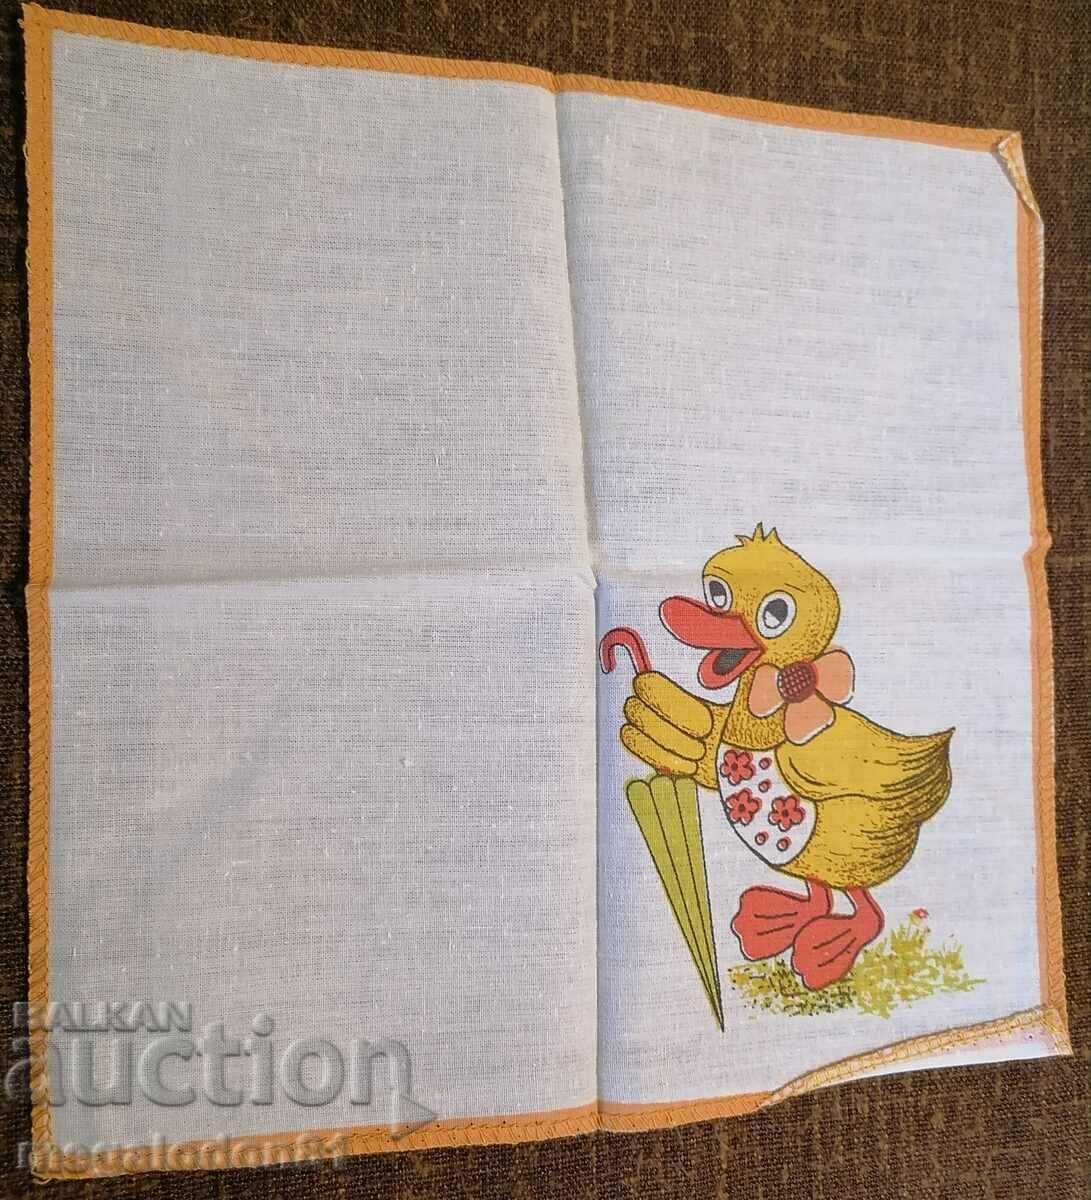 Old handkerchief from the social years - duckling